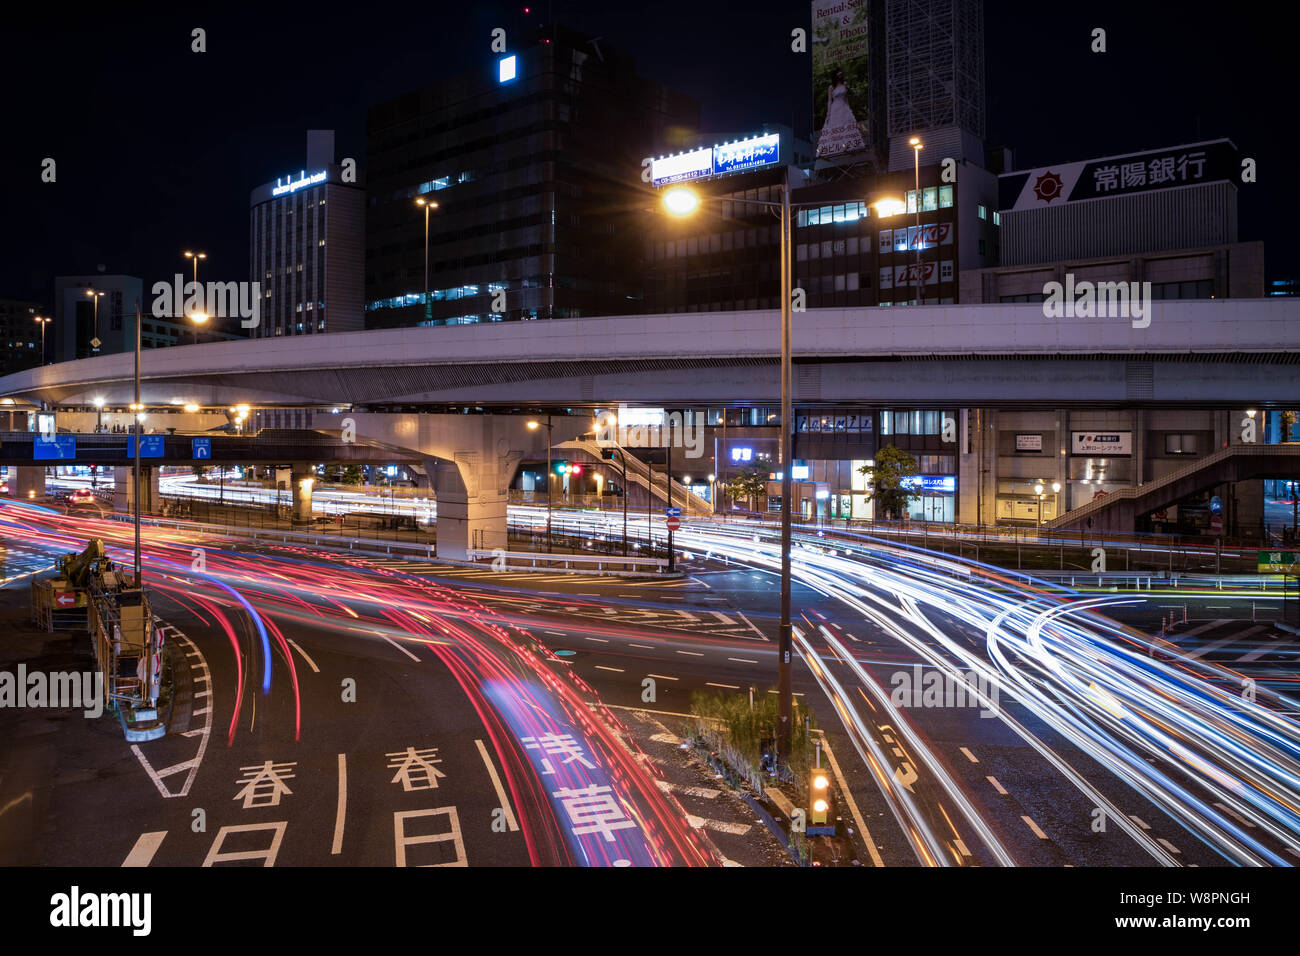 View of Ueno Station crossing at night. Motion blur light trail. Landscape orientation. Stock Photo